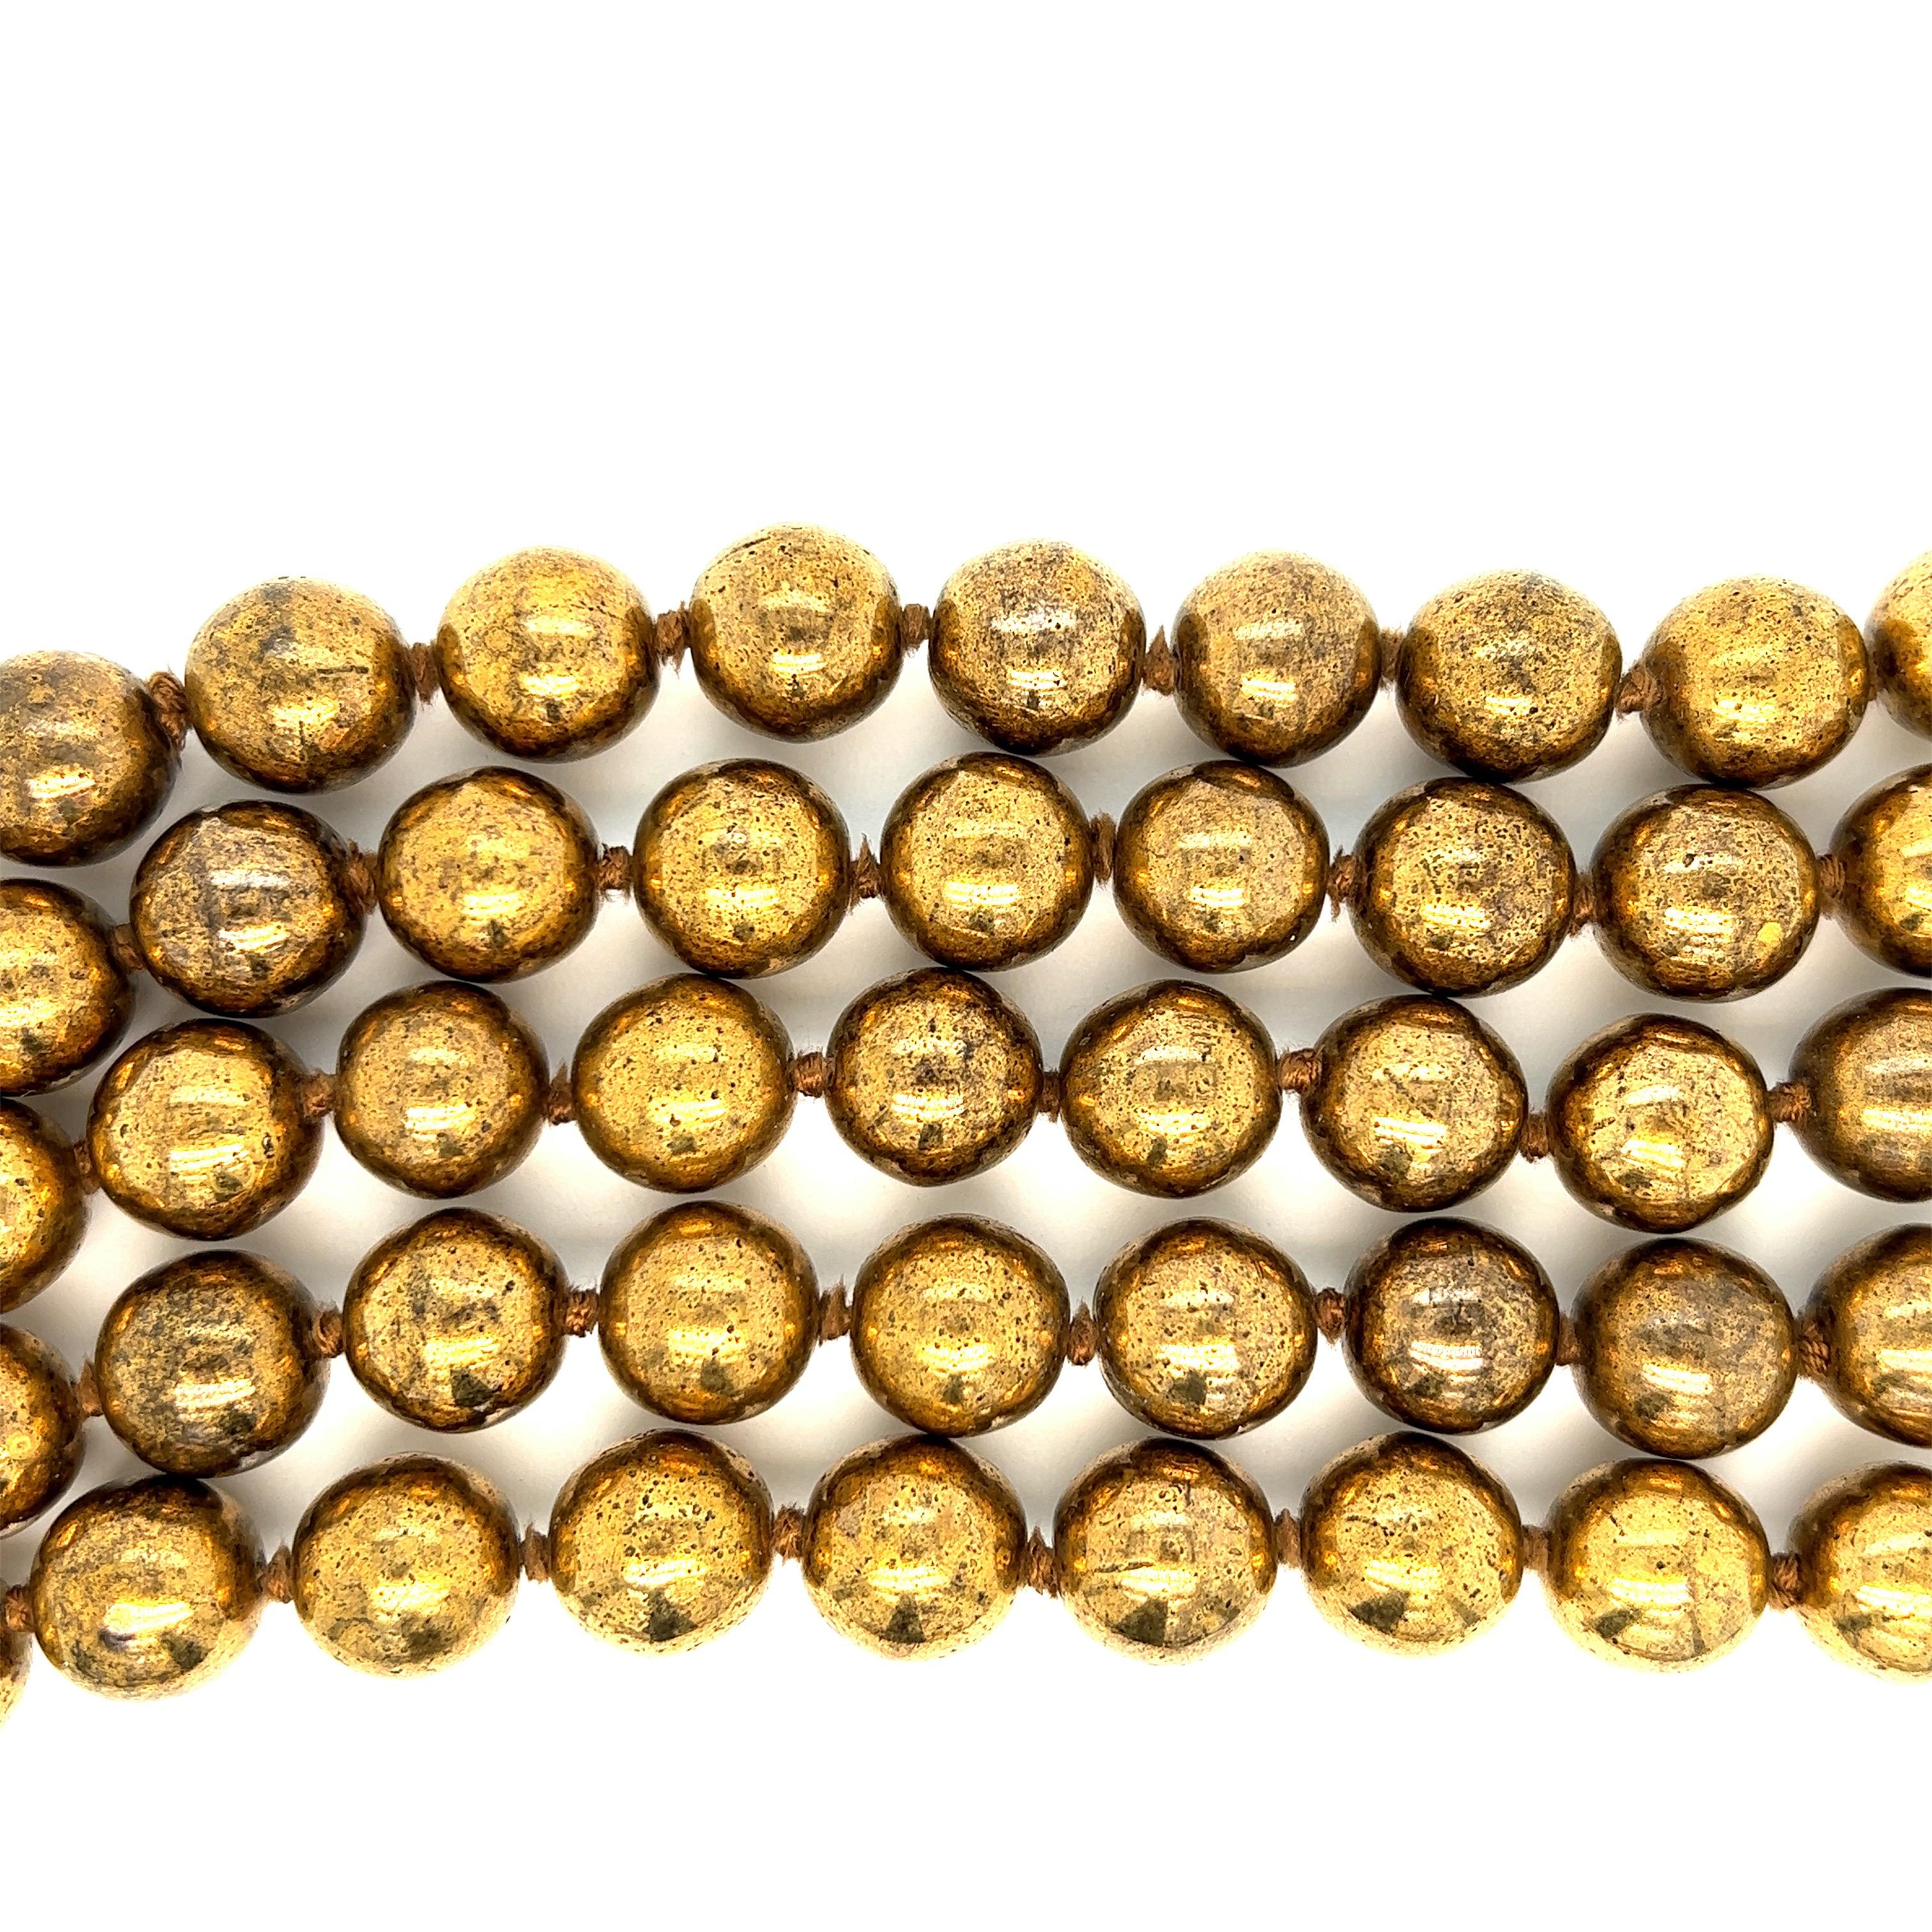 Chanel vintage gilt-metal bead bracelet, made in France

Five-strand gilt-metal beads (13 mm), forming a wide bracelet; marked Chanel, 23, made in France

Size: width 2.5 inches, length 7 inches
Total weight: 200.9 grams